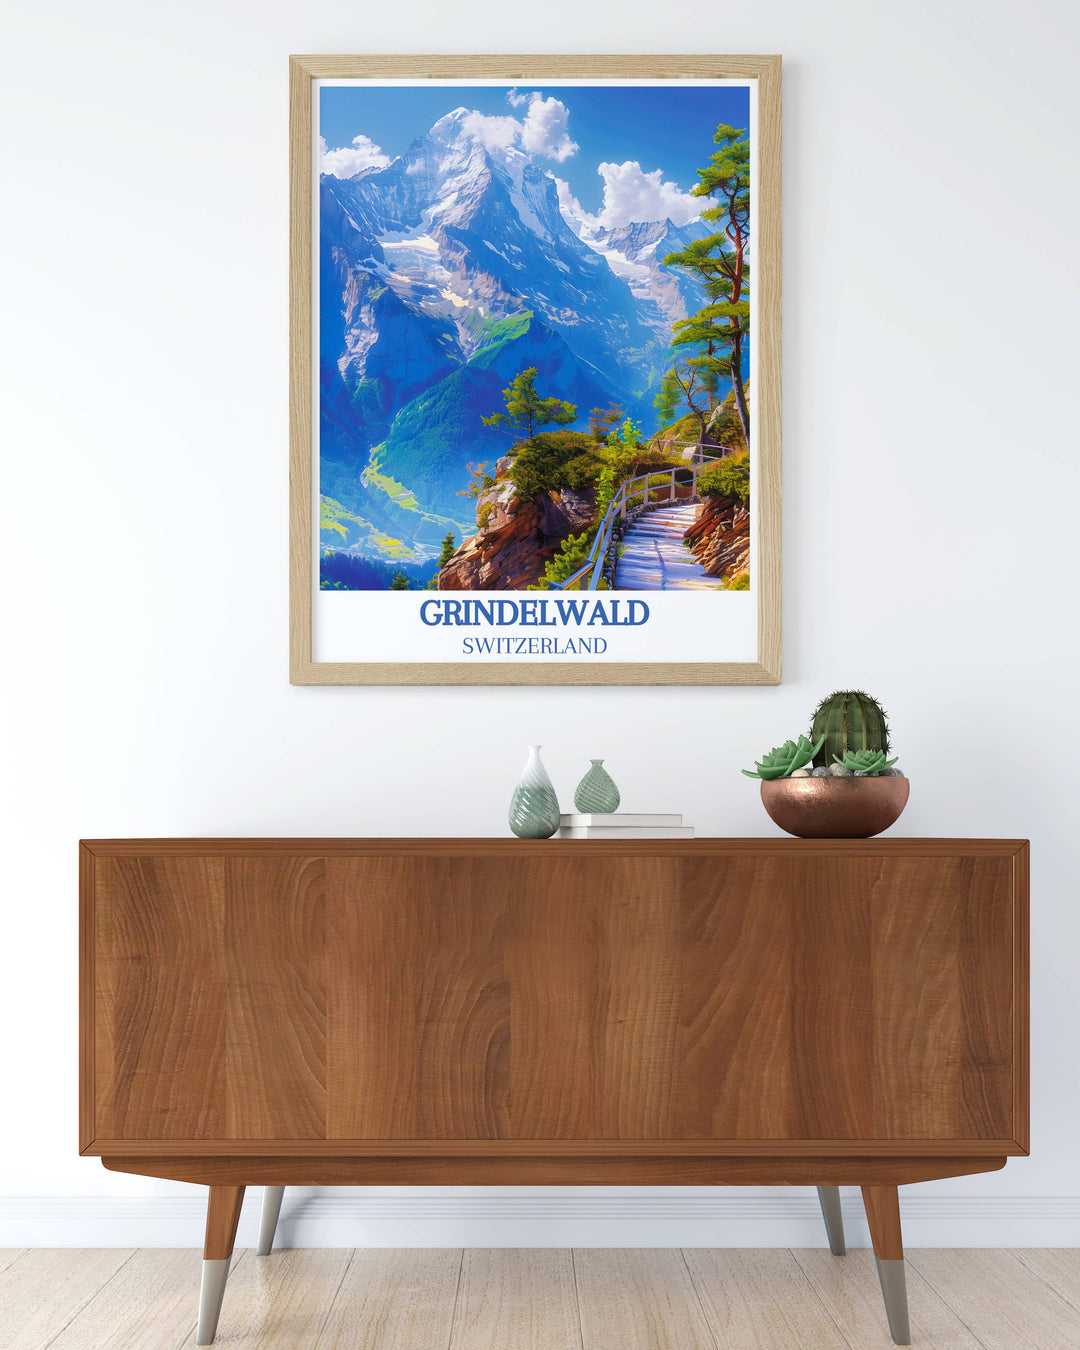 Winter panorama of Grindelwald with Eiger Mountain covered in snow, ideal for ski resort and travel posters.